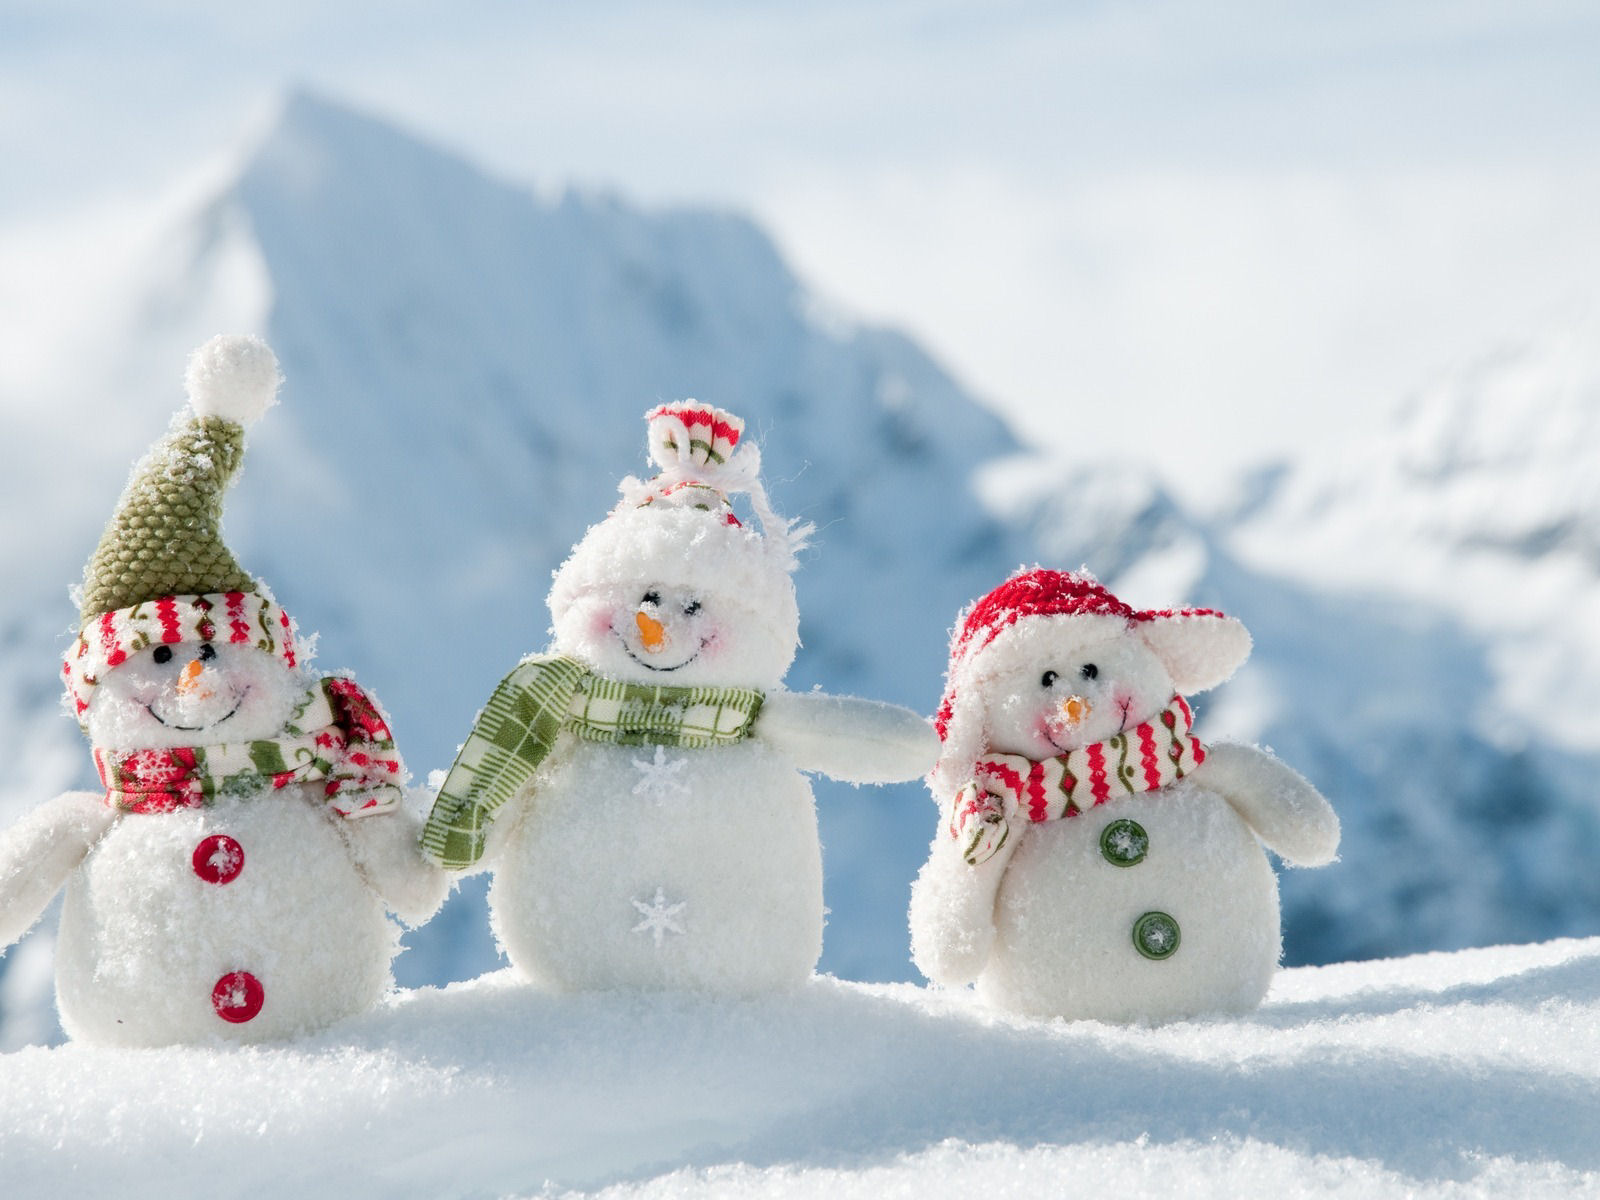 Fun HD Wallpaper Picture Snowman Christmas Ideas And Greetings